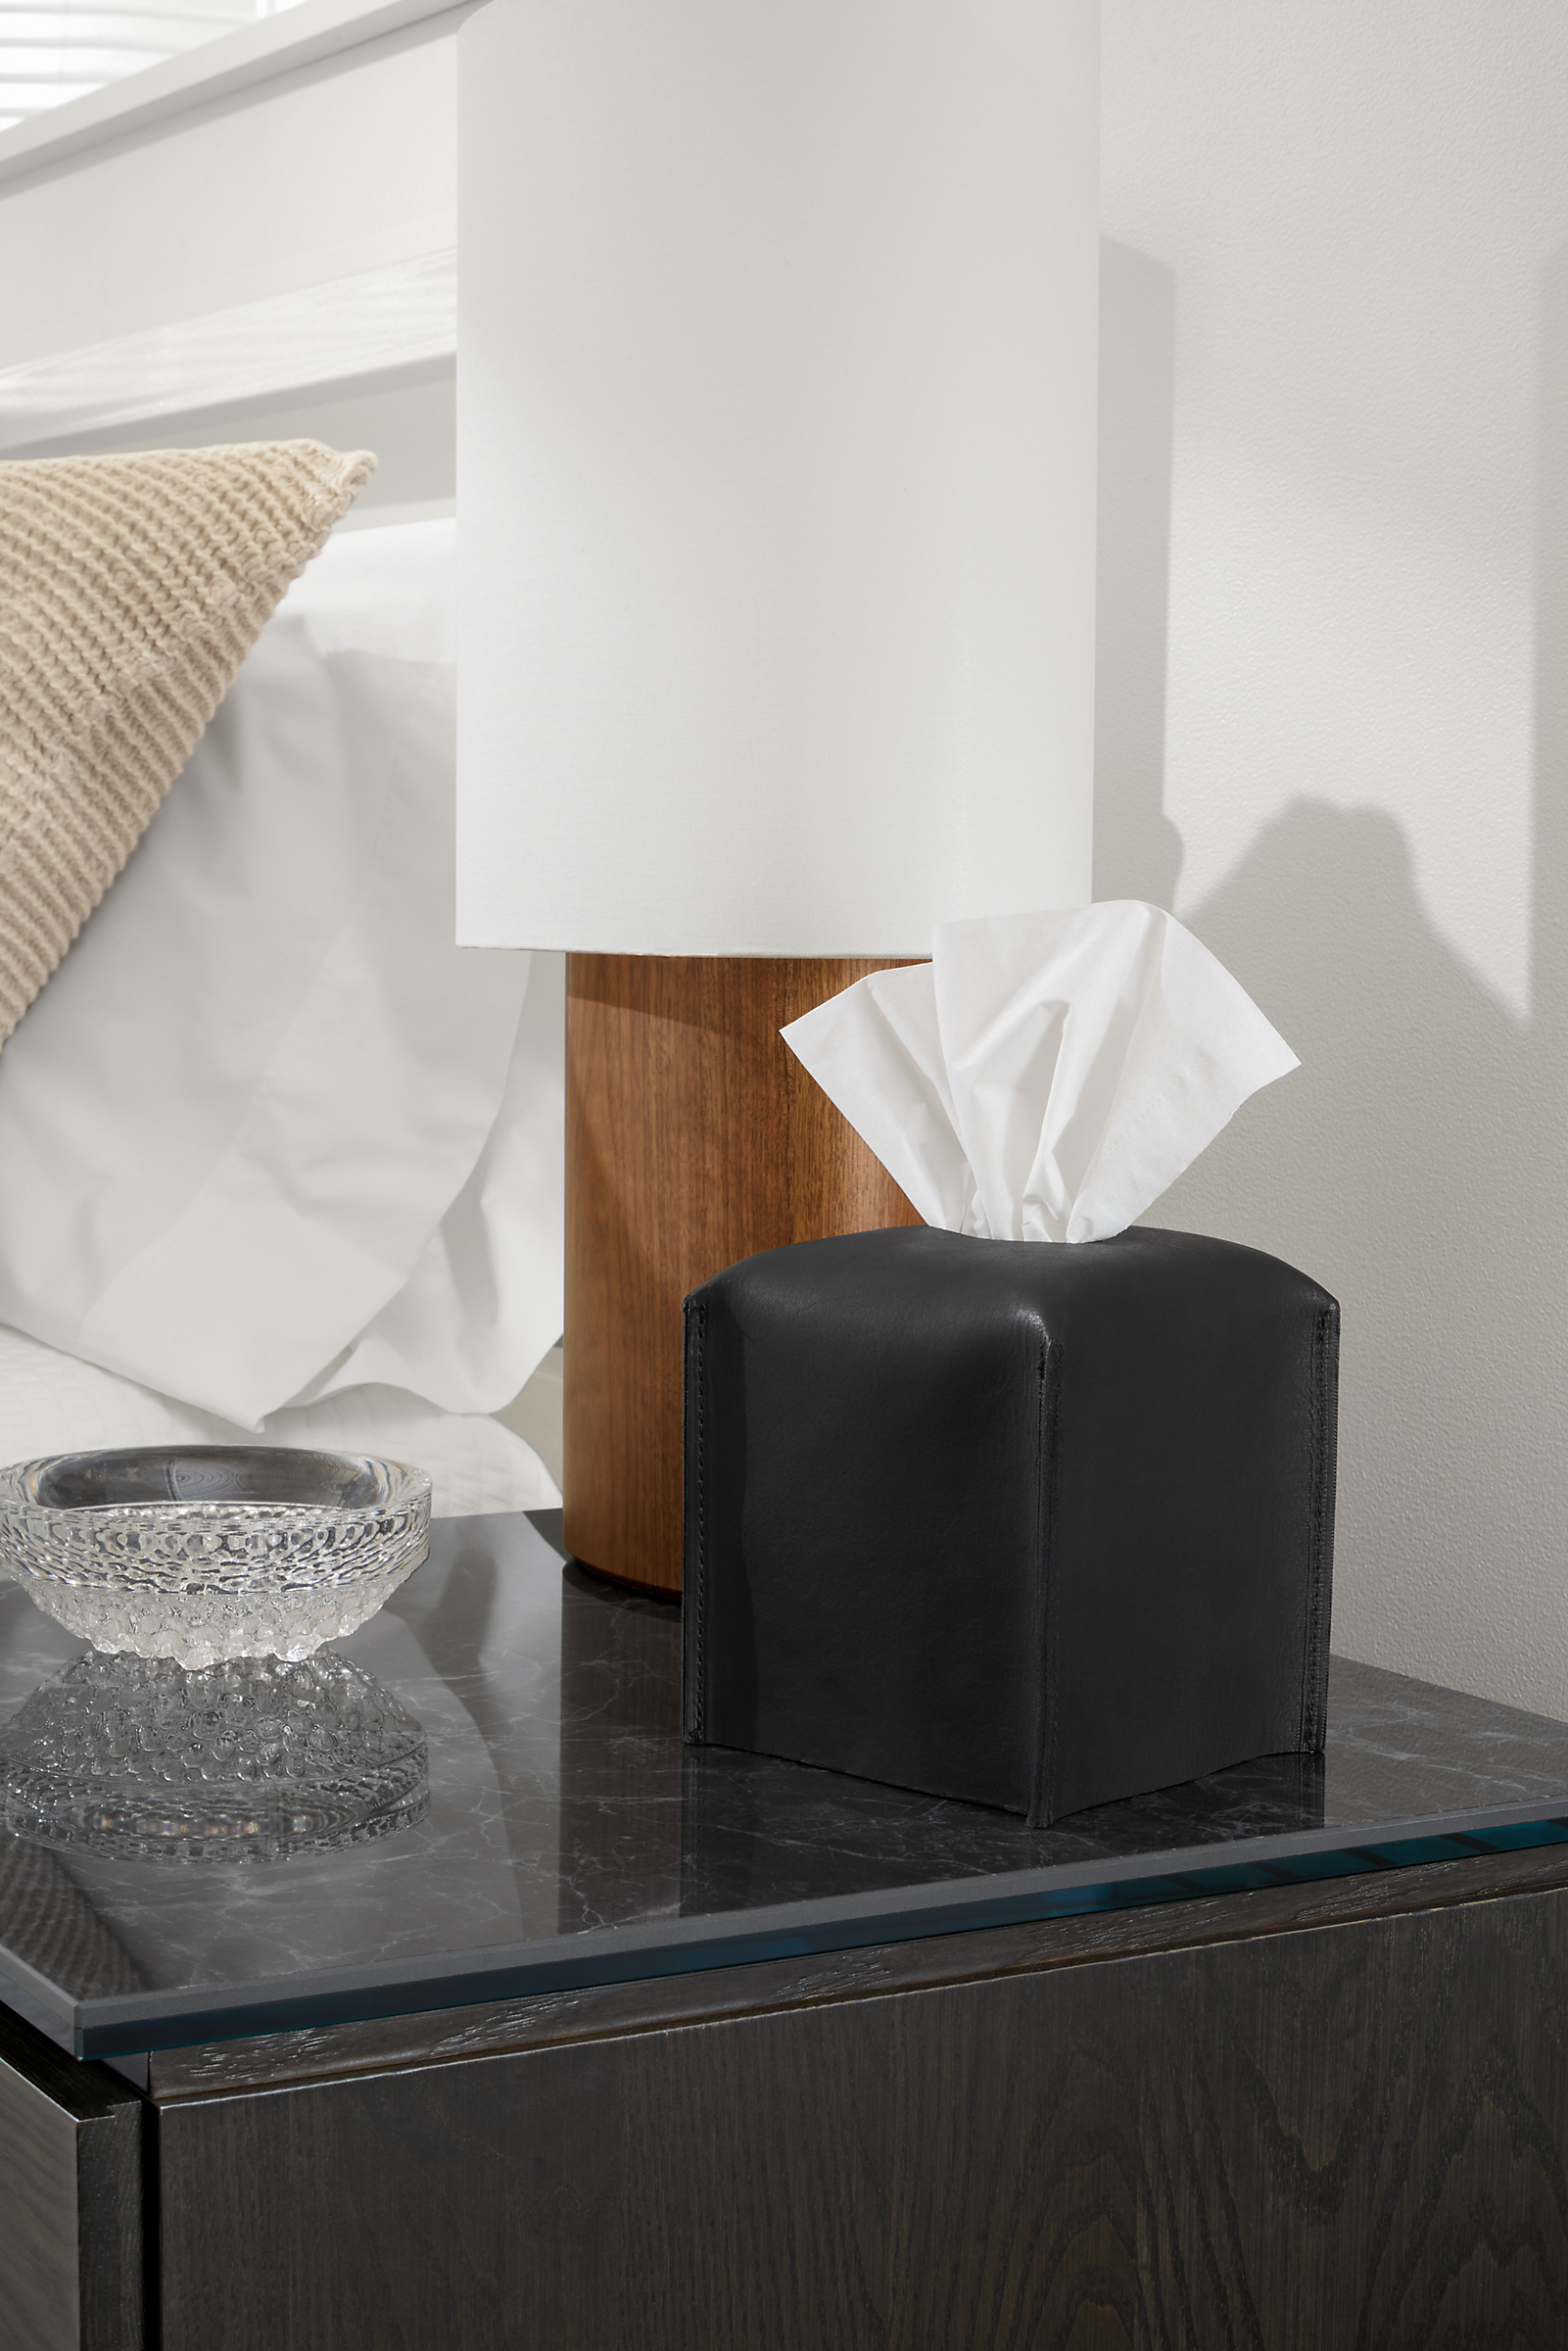 detail of Paros Square Tissue Box Cover in Black on nightstand.